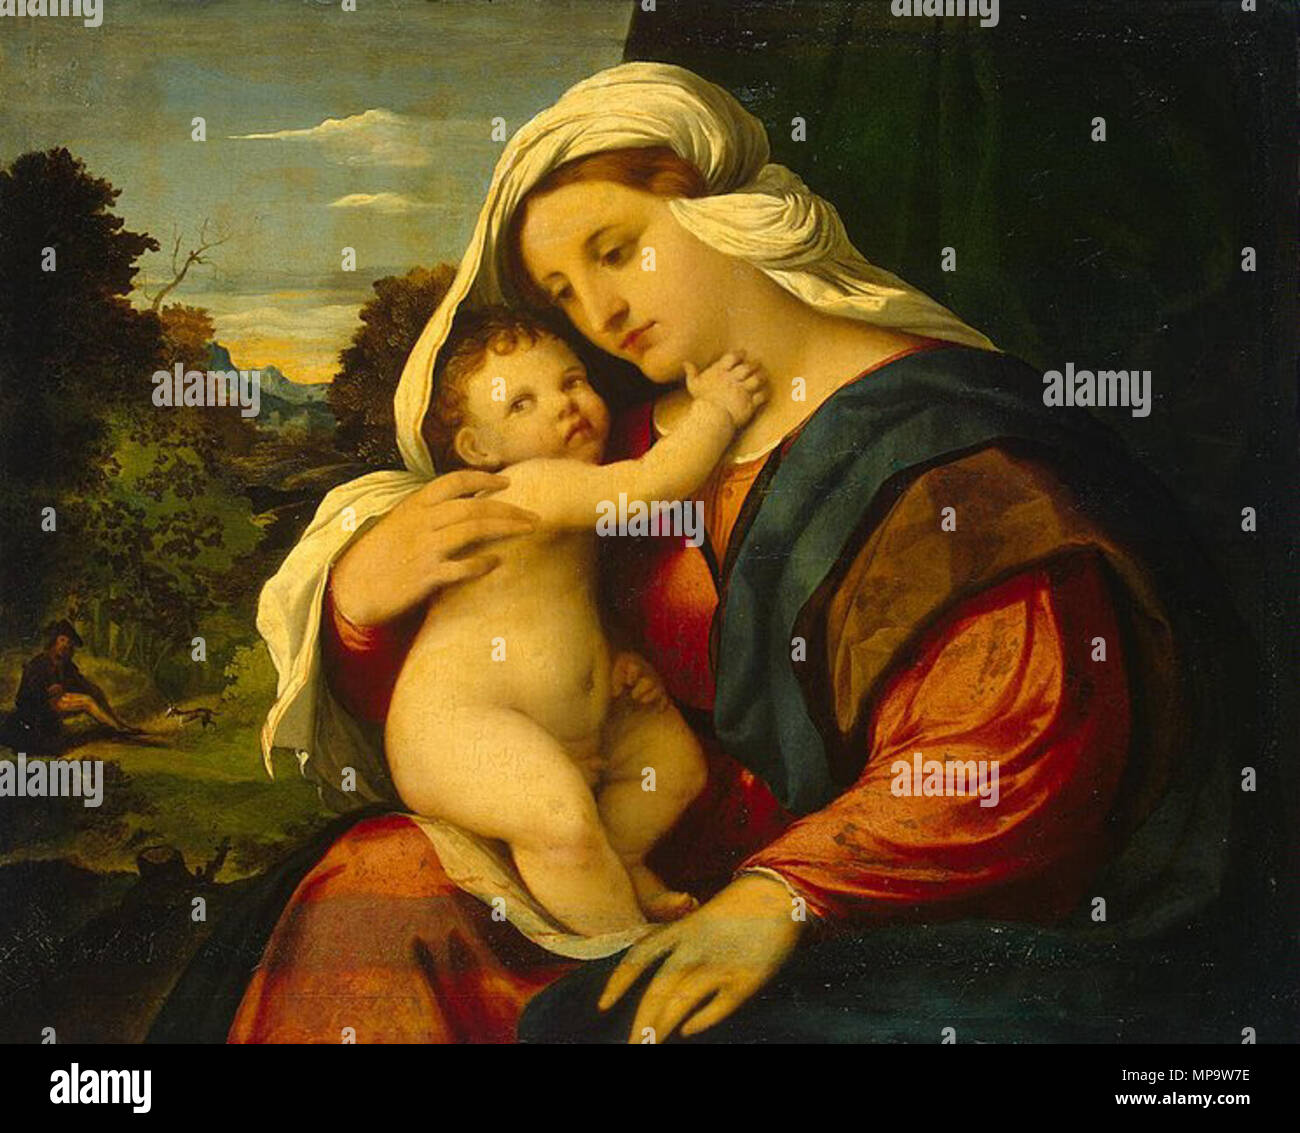 .  English: Author: Jacopo Palma il Vecchio Painting, Oil on canvas, 59x72 cm Origin: Italy, 1515/1516 Personage: Madonna and Child Source of entry: via the State Museum Fund from the collection of V.D. Nabokov, Petrograd, 1919 School: Venetian Theme: The Bible and Christianity Exibition: Italian Art: 13th - 18th centuries . between 1515 and 1516.   Palma Vecchio  (1480–1528)     Alternative names Birth name: Jacopo Negretti  Description Italian painter  Date of birth/death 1480 30 July 1528  Location of birth/death Serina bei Bergamo Venice  Work period Renaissance  Work location Venice  Auth Stock Photo